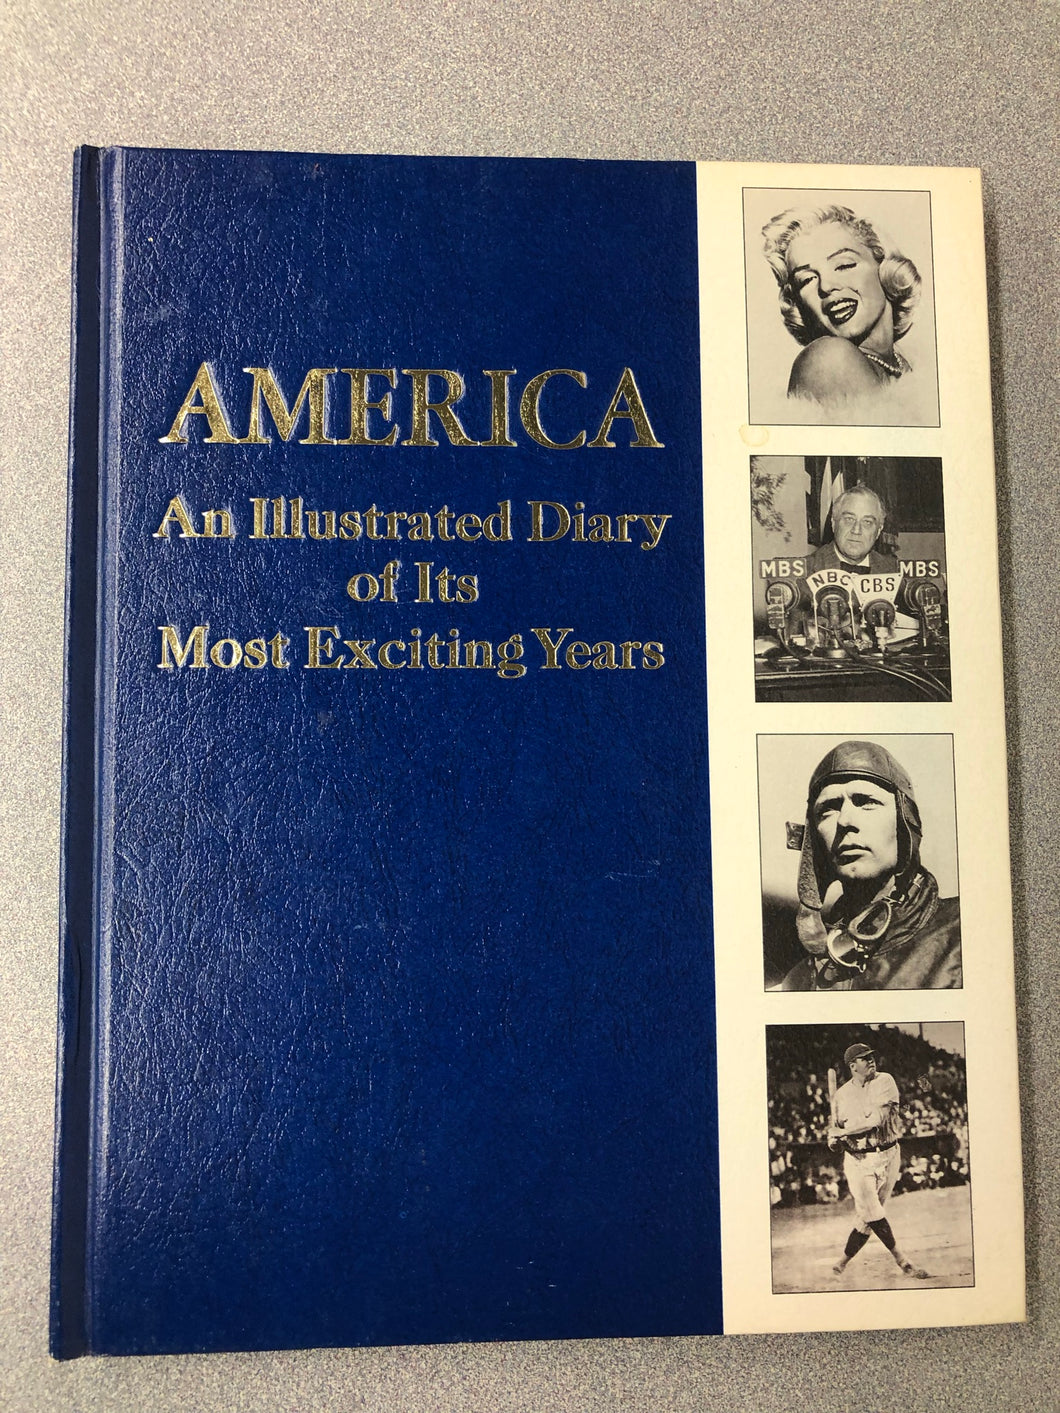 America: An Illustrated Diary of Its Most Exciting Years, published by American Family Enterprises [1972] SS 10/21